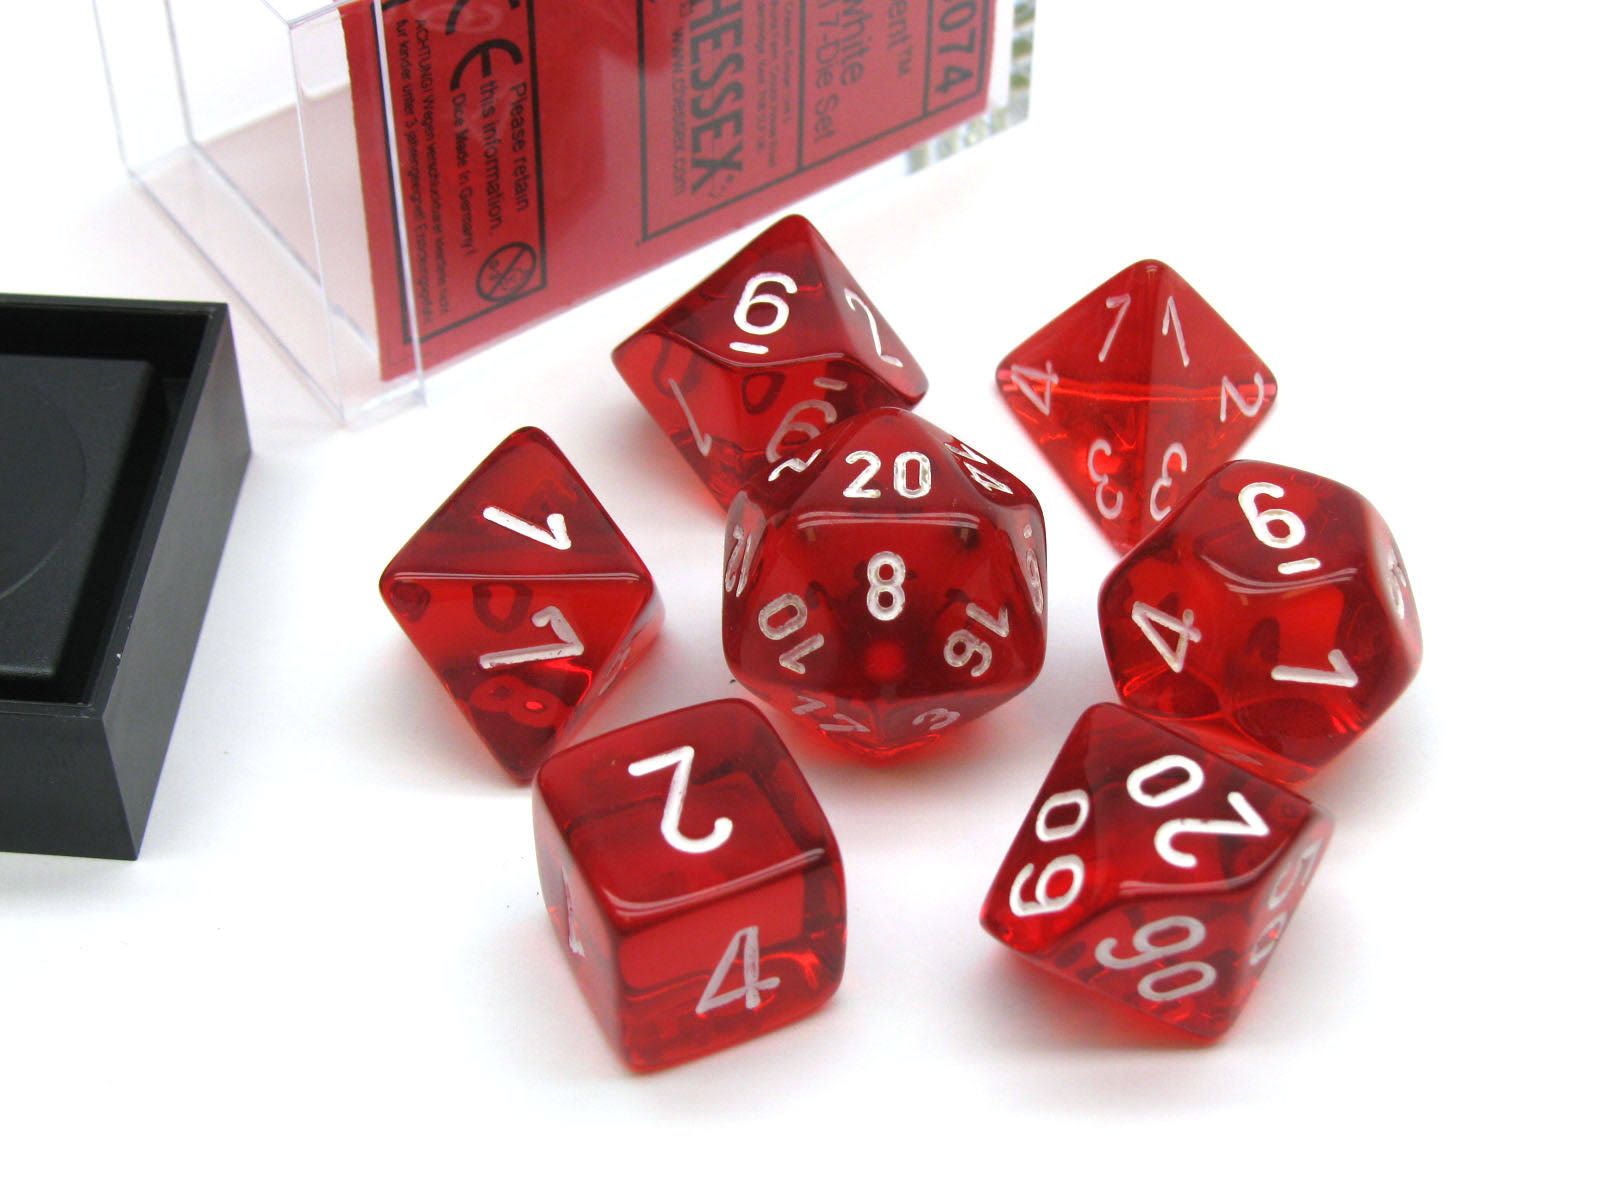 Chessex Polyhedral 7-Die Set - Translucent - Red With White